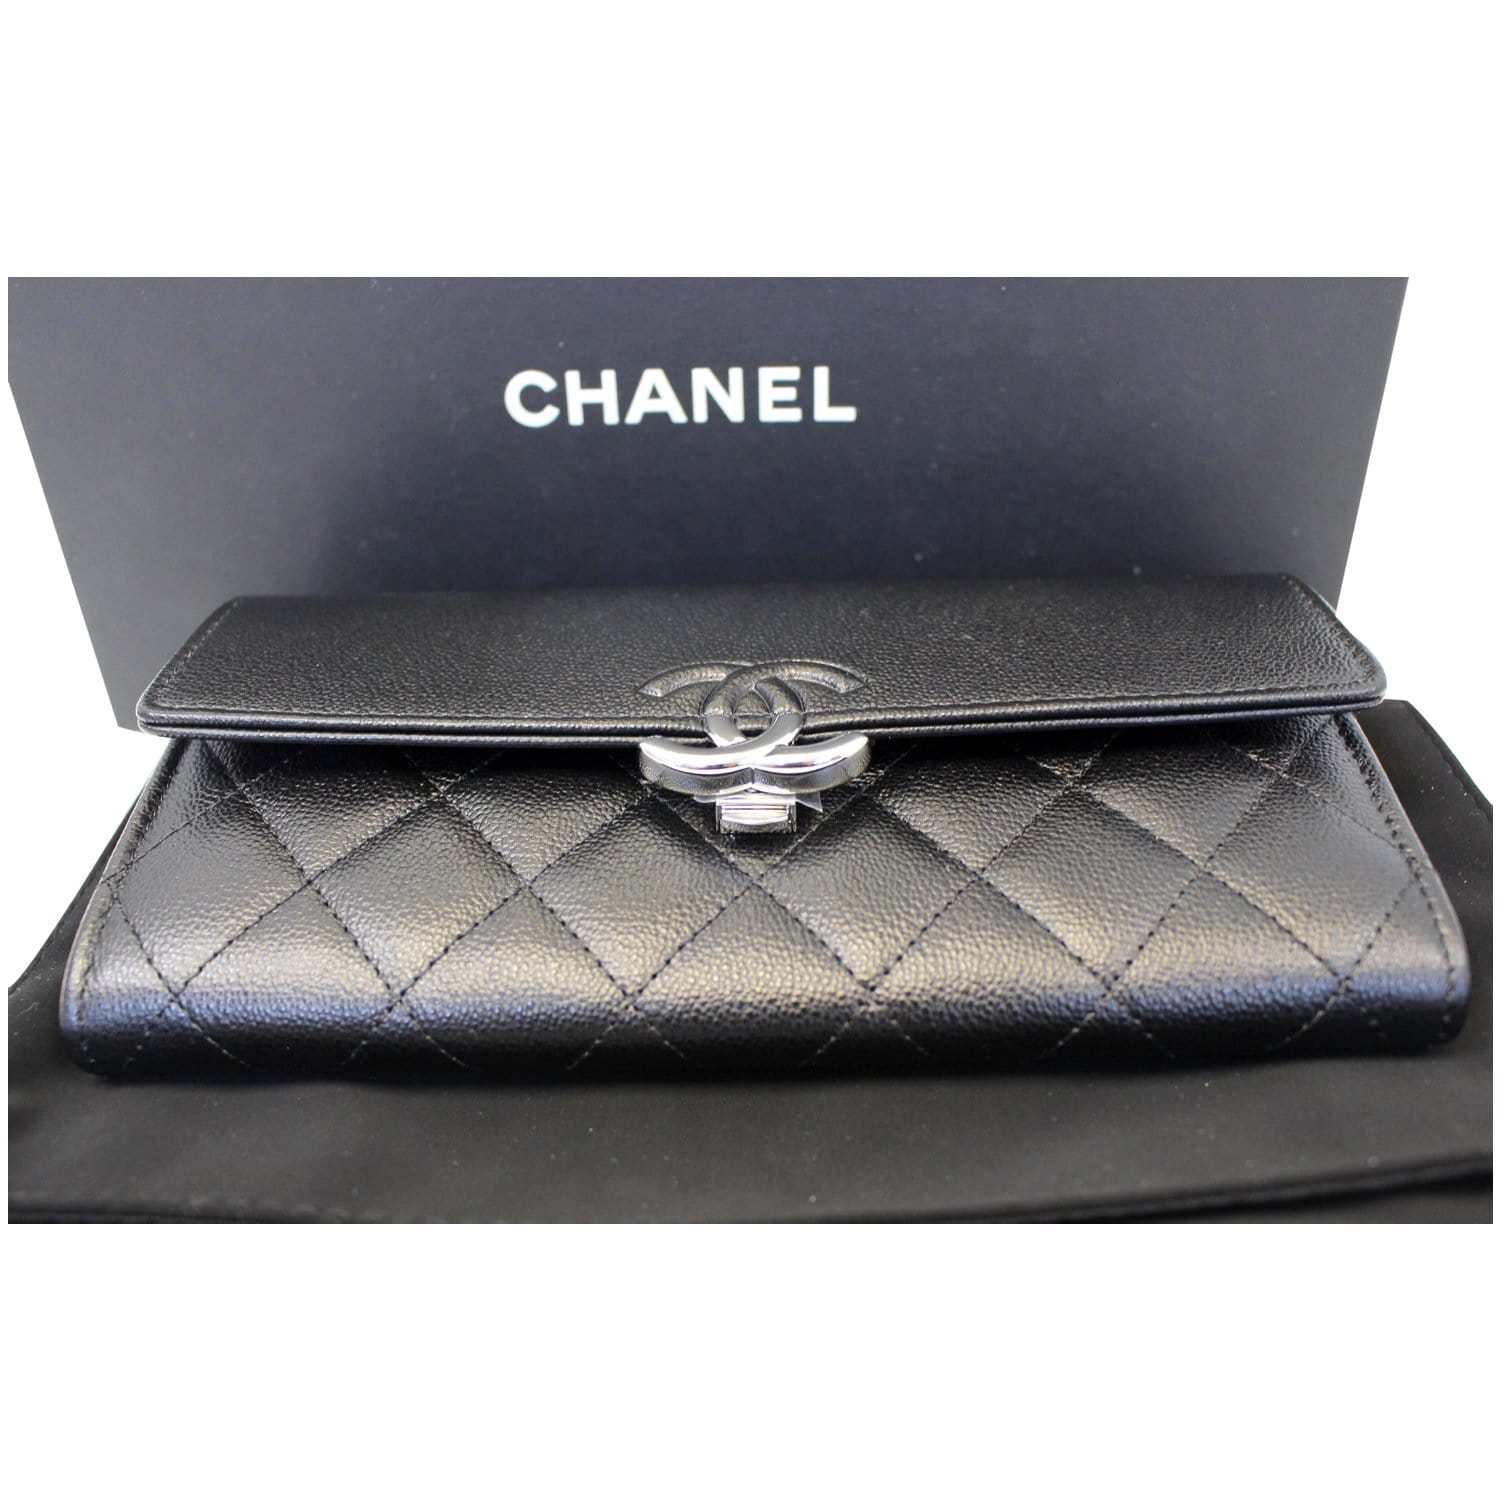 Chanel Flap Wallet Grained shiny calfskin AP2739 Black - lushenticbags